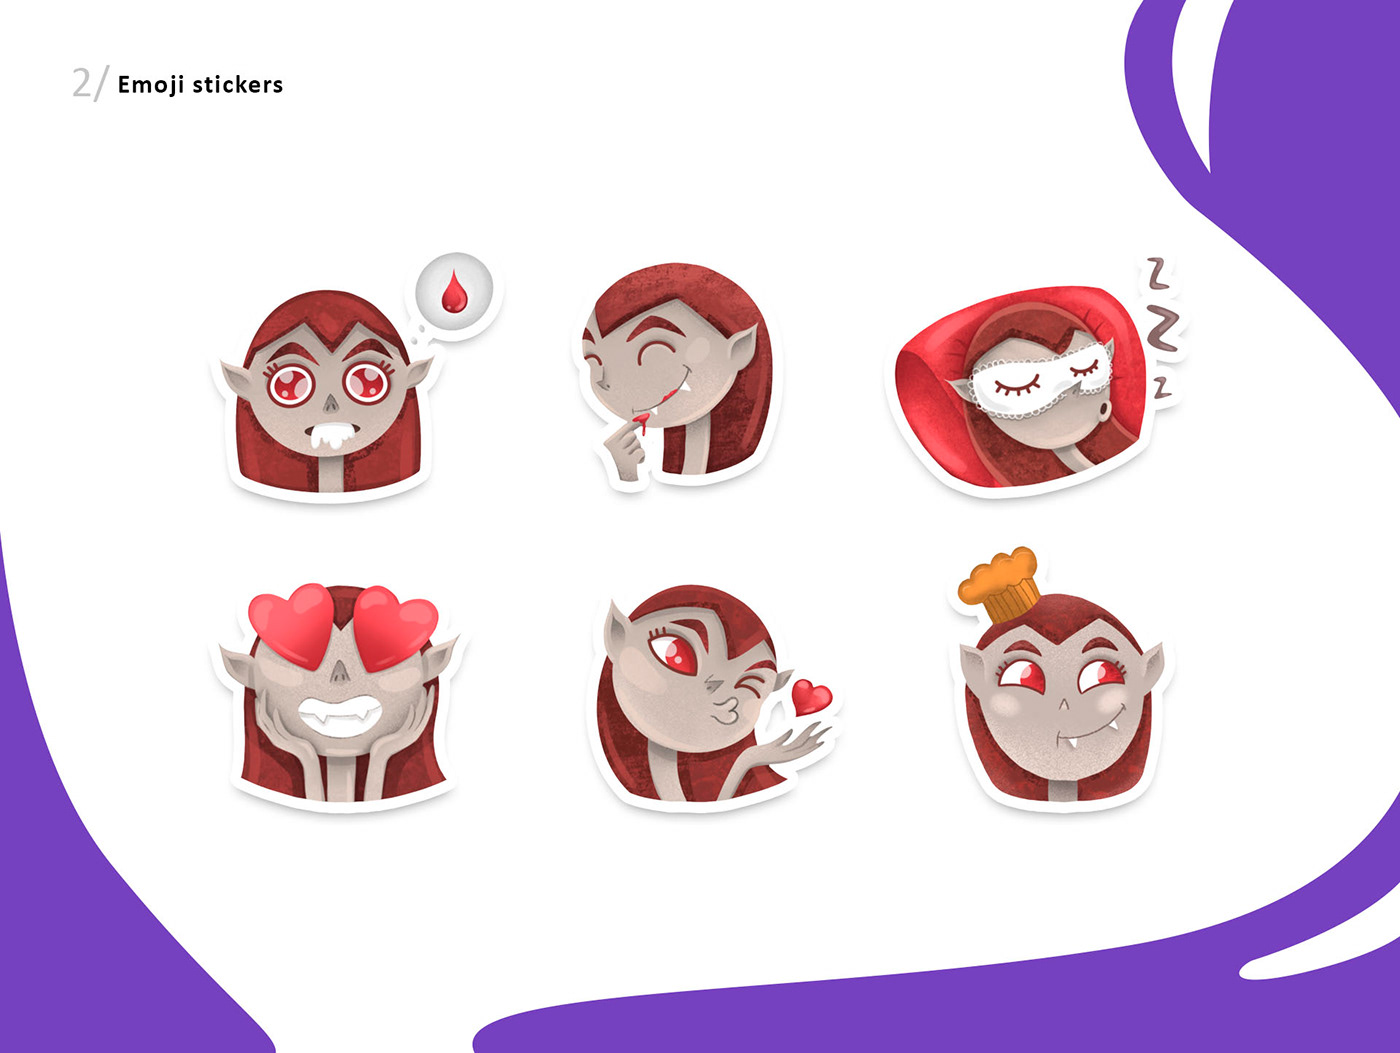 Character design  Food  red sticker pack stickers vampire Вампир еда стикеры эмоджи